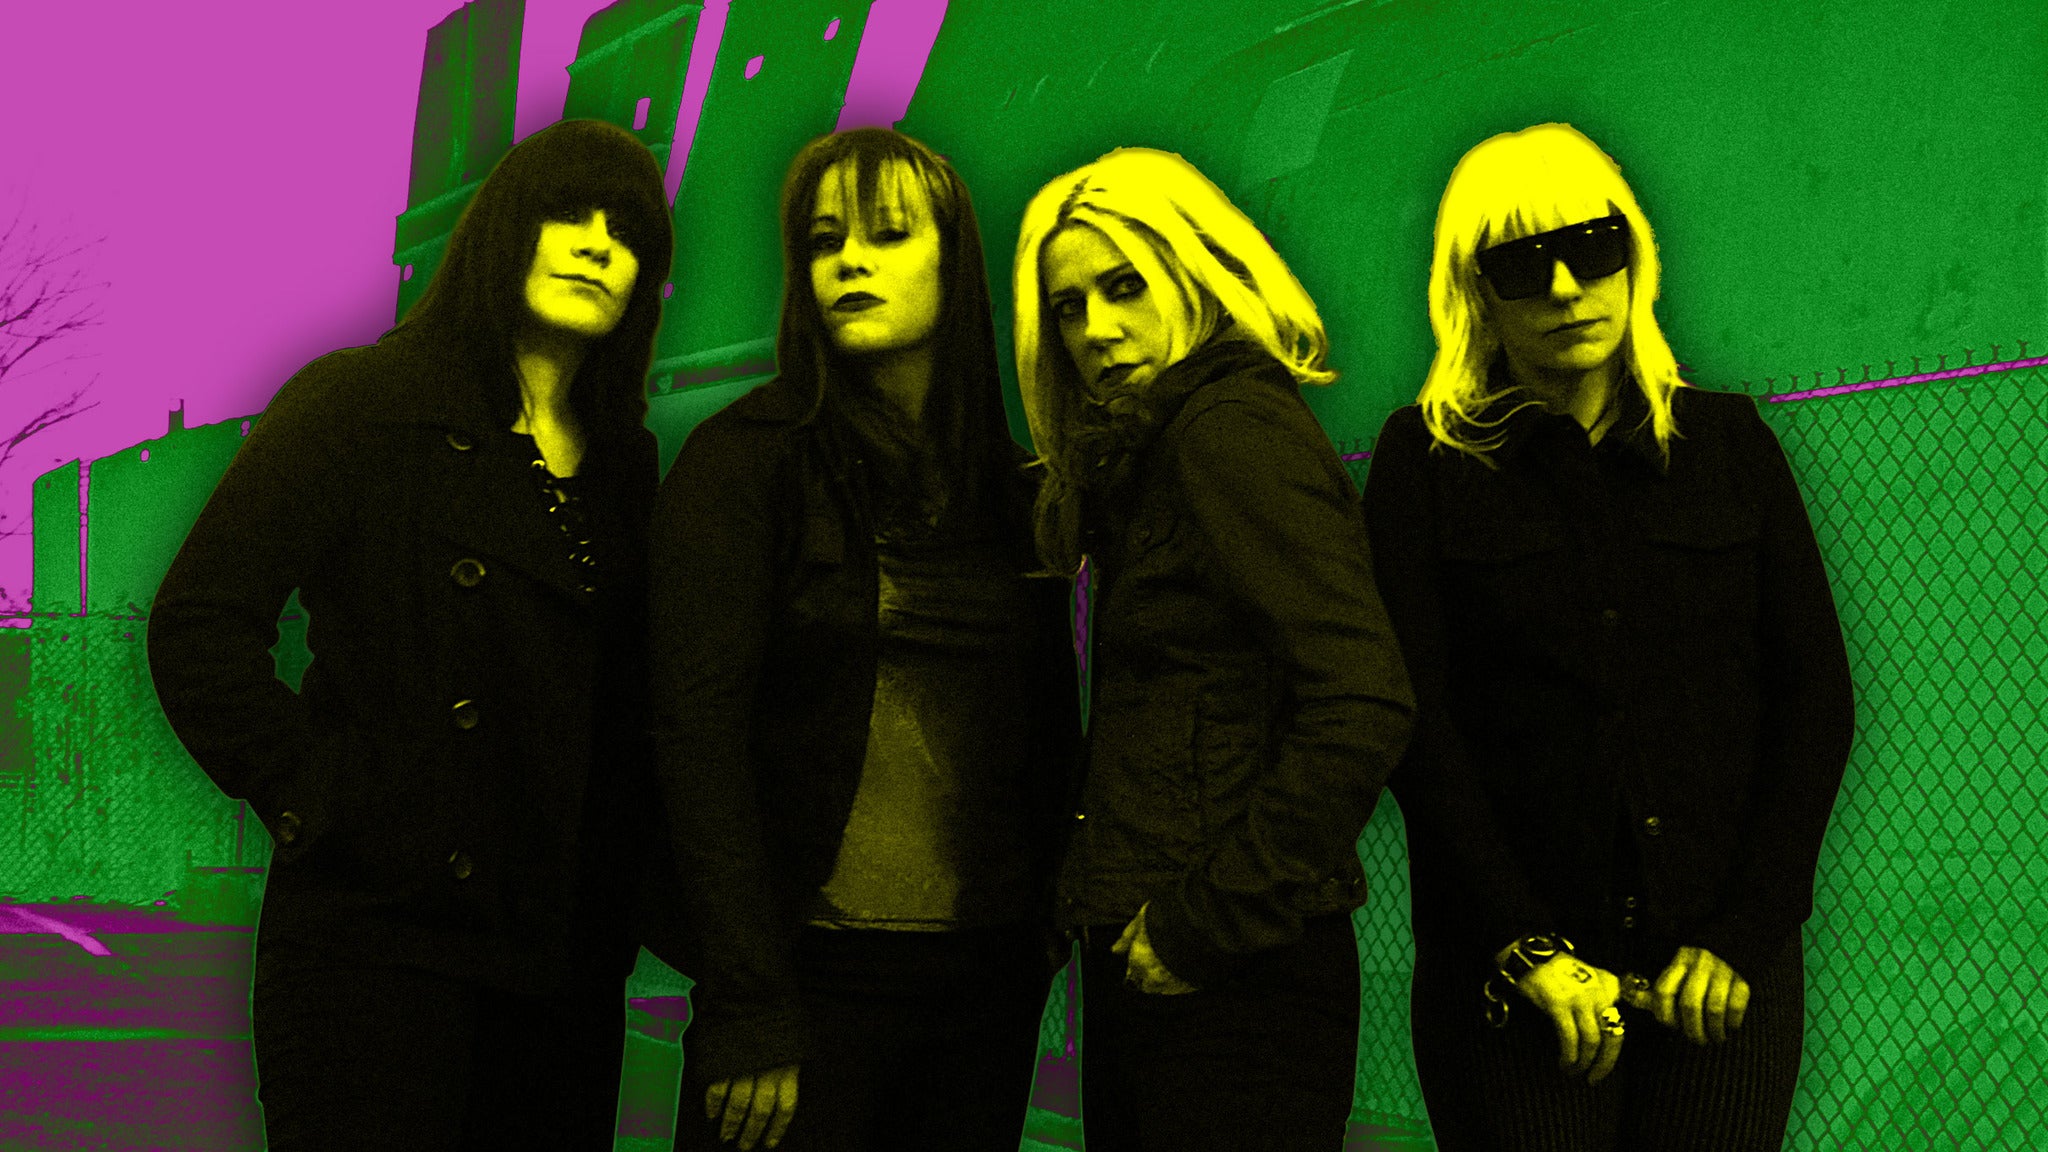 Image used with permission from Ticketmaster | L7 Performing Bricks Are Heavy tickets